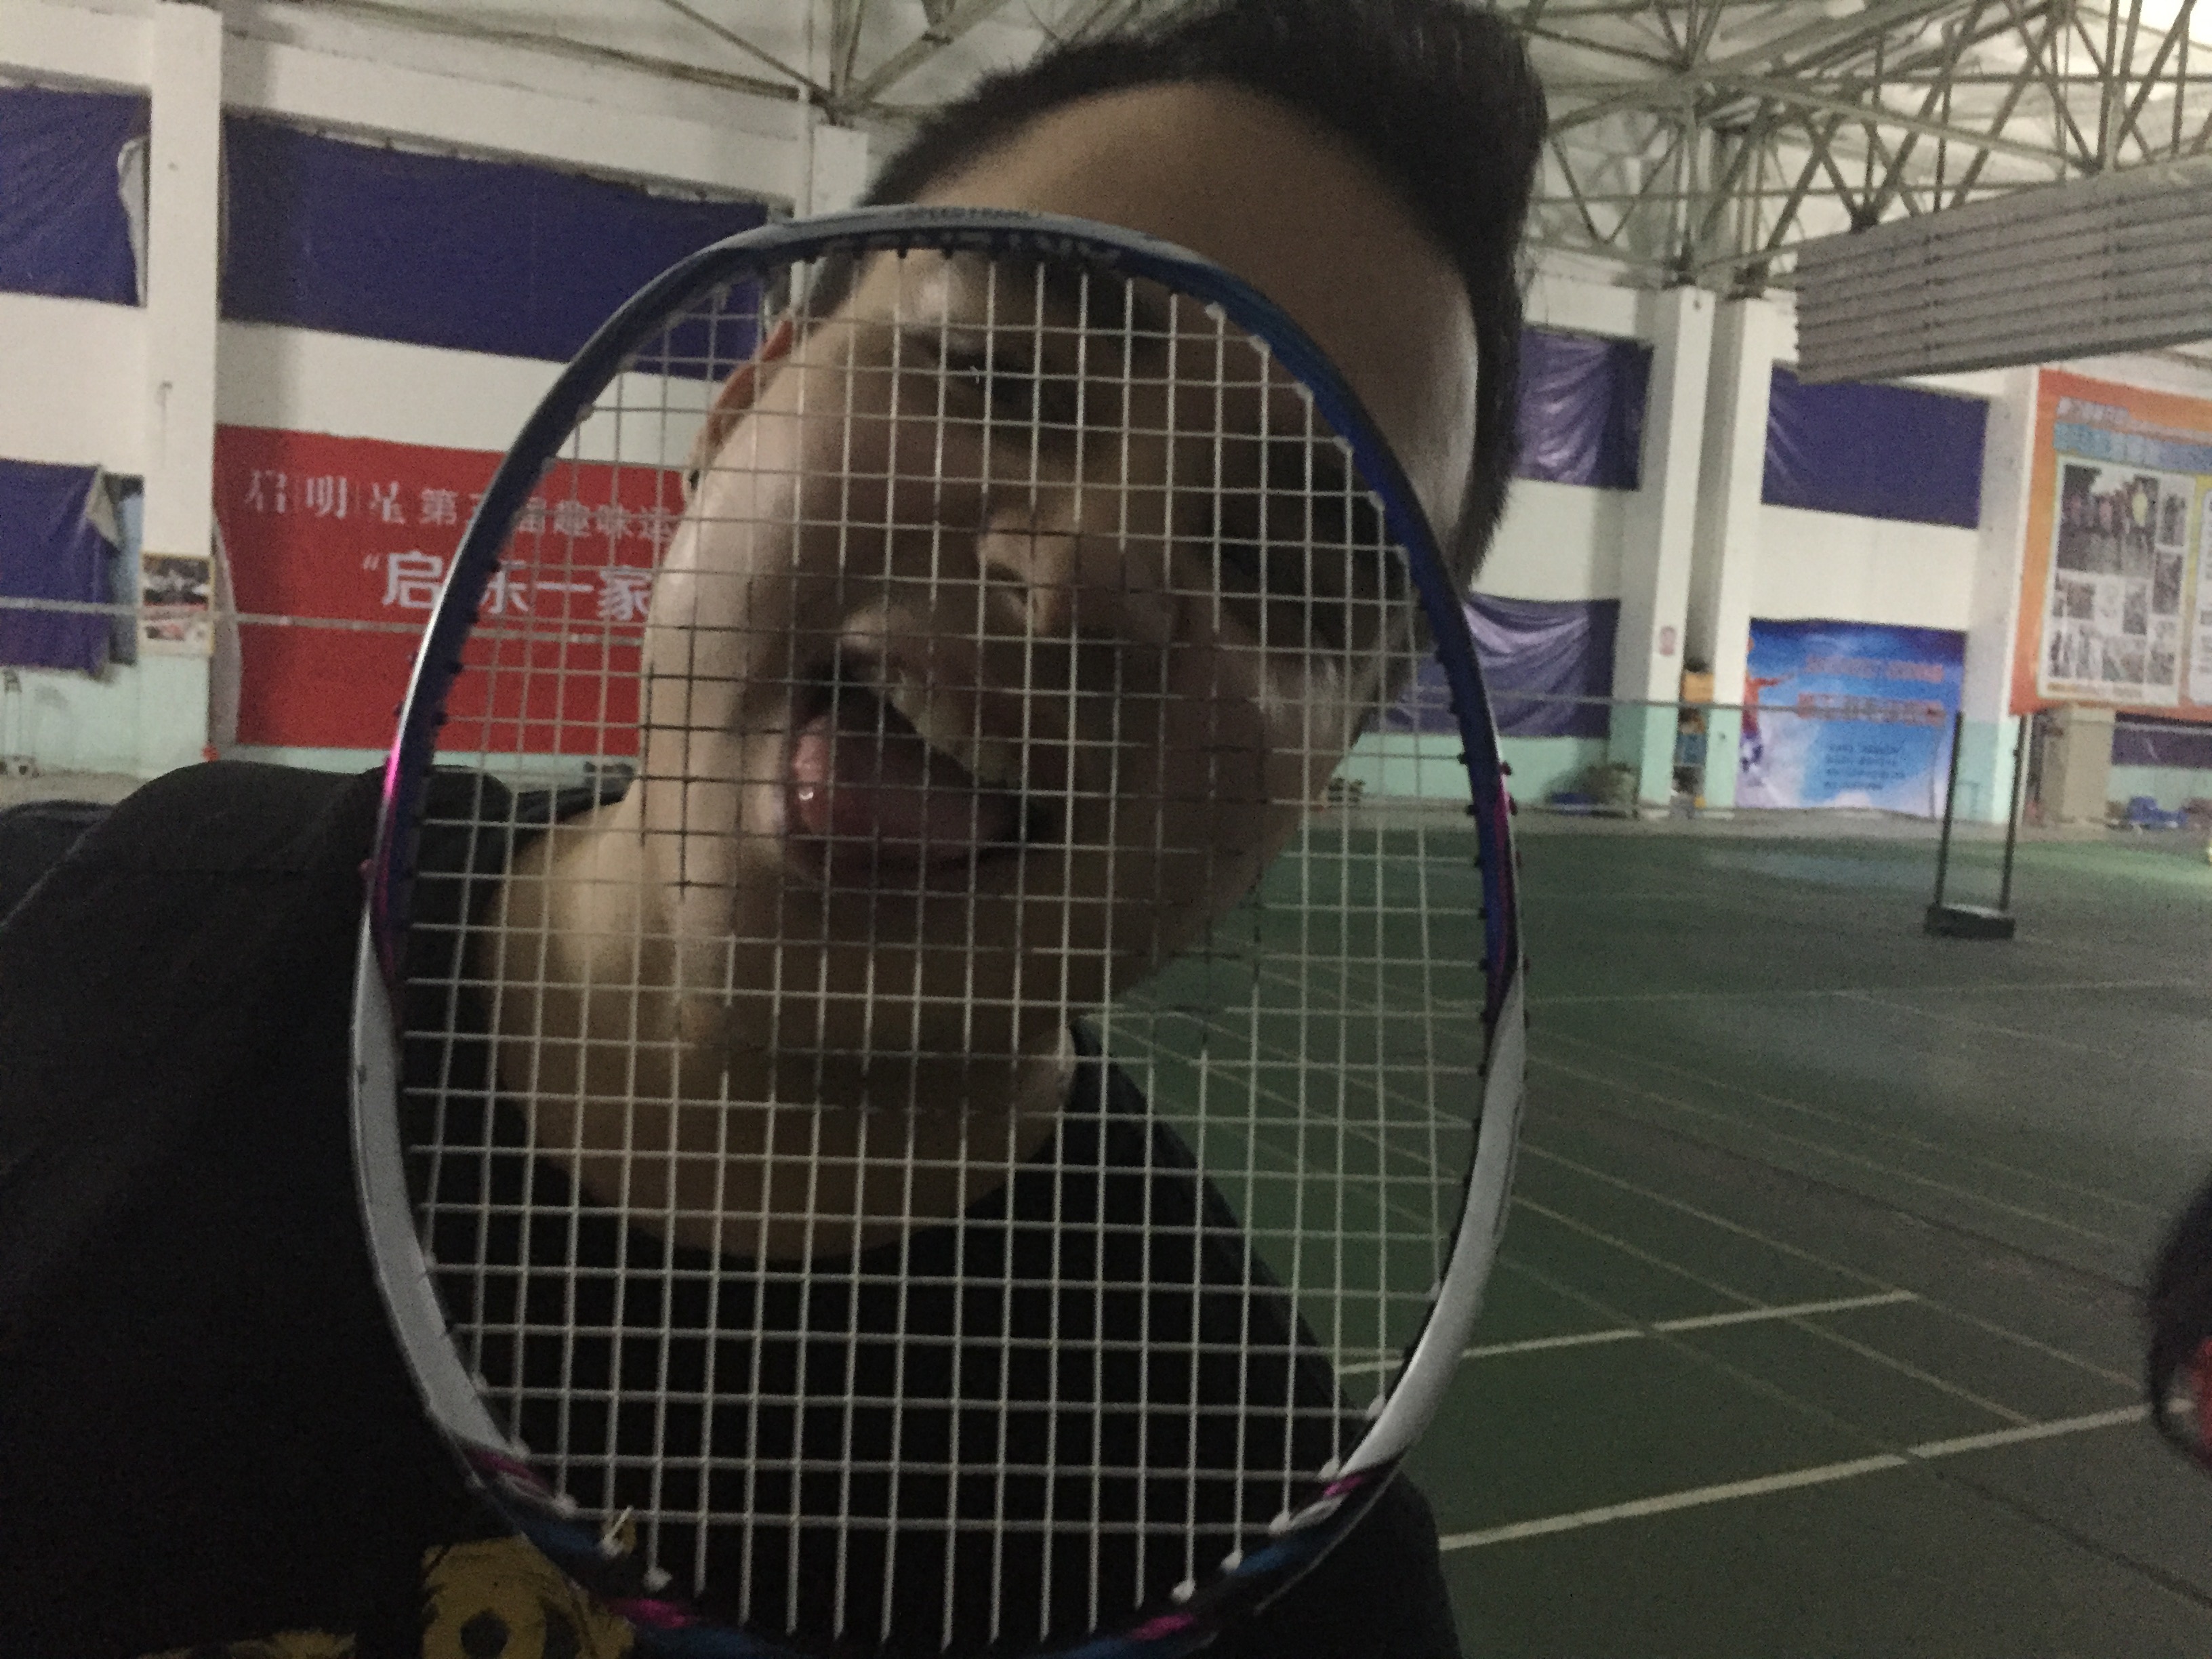 Ivan got a little tongue action with my racket, The perv. 